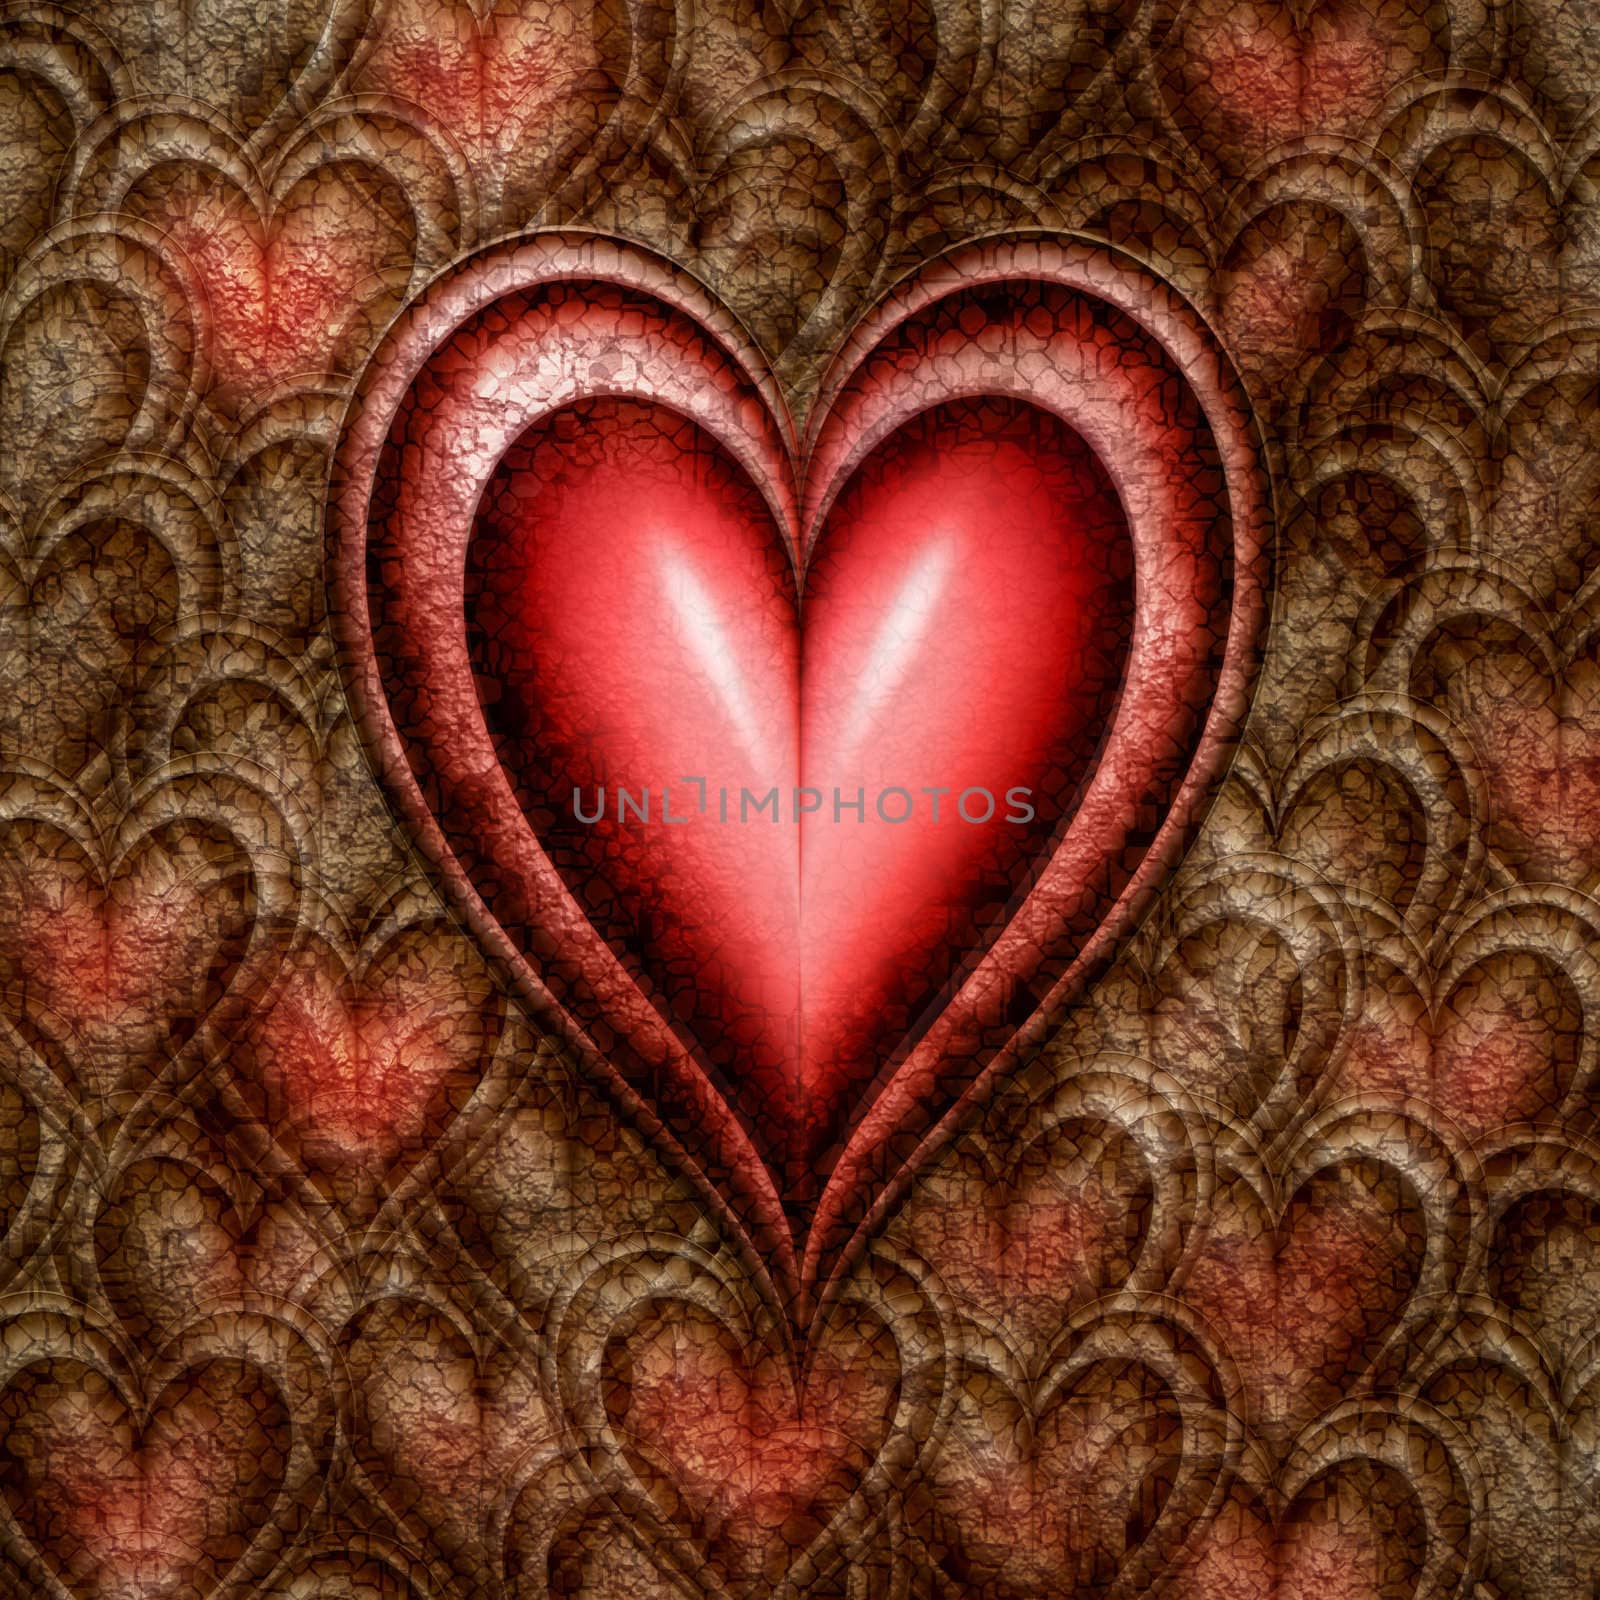 emergence of love by clearviewstock